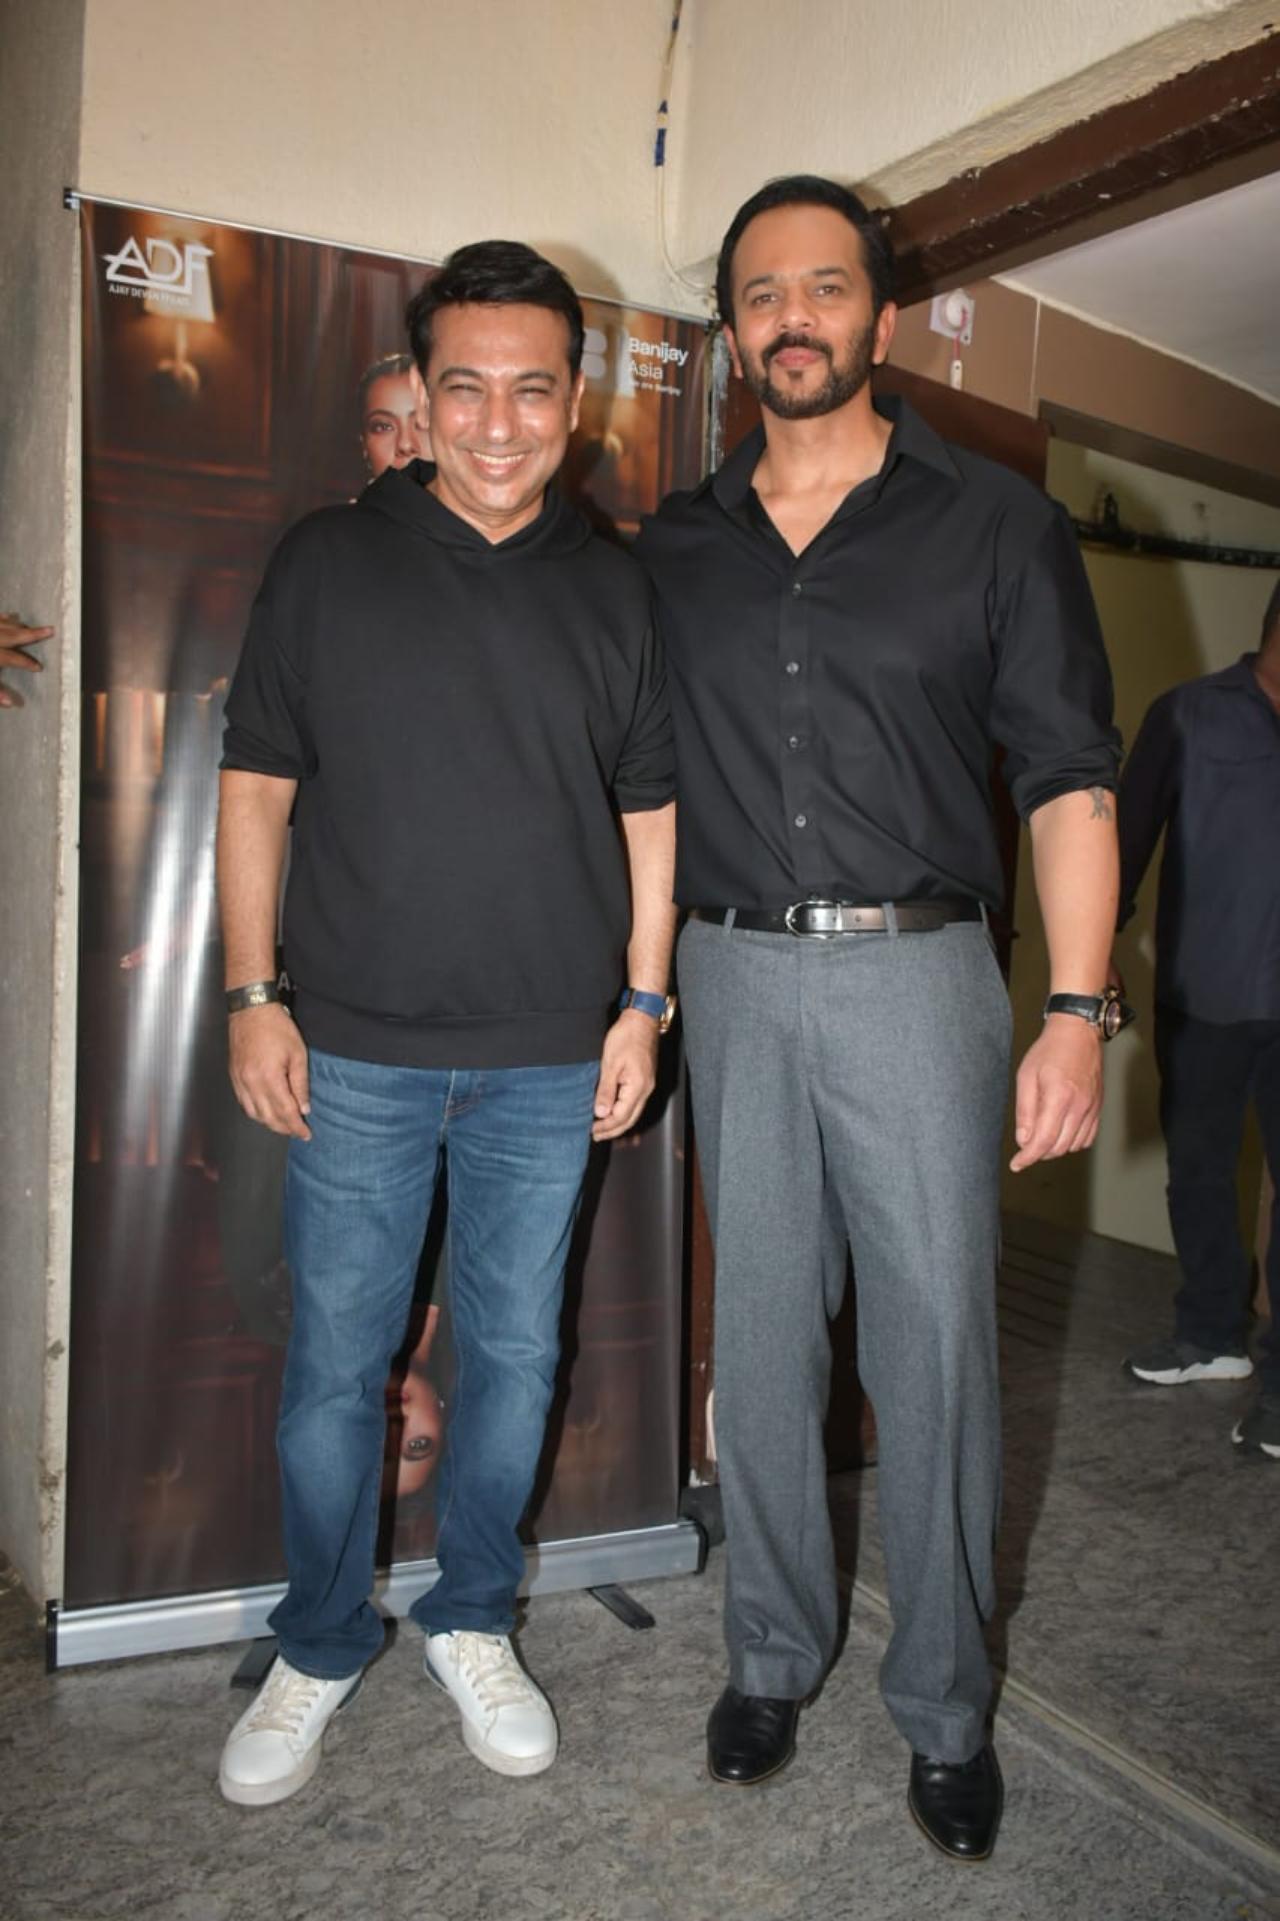 Dressed in a black shirt and grey pants, Shetty happily posed for the paparazzi on the red carpet and also while entering the theatre